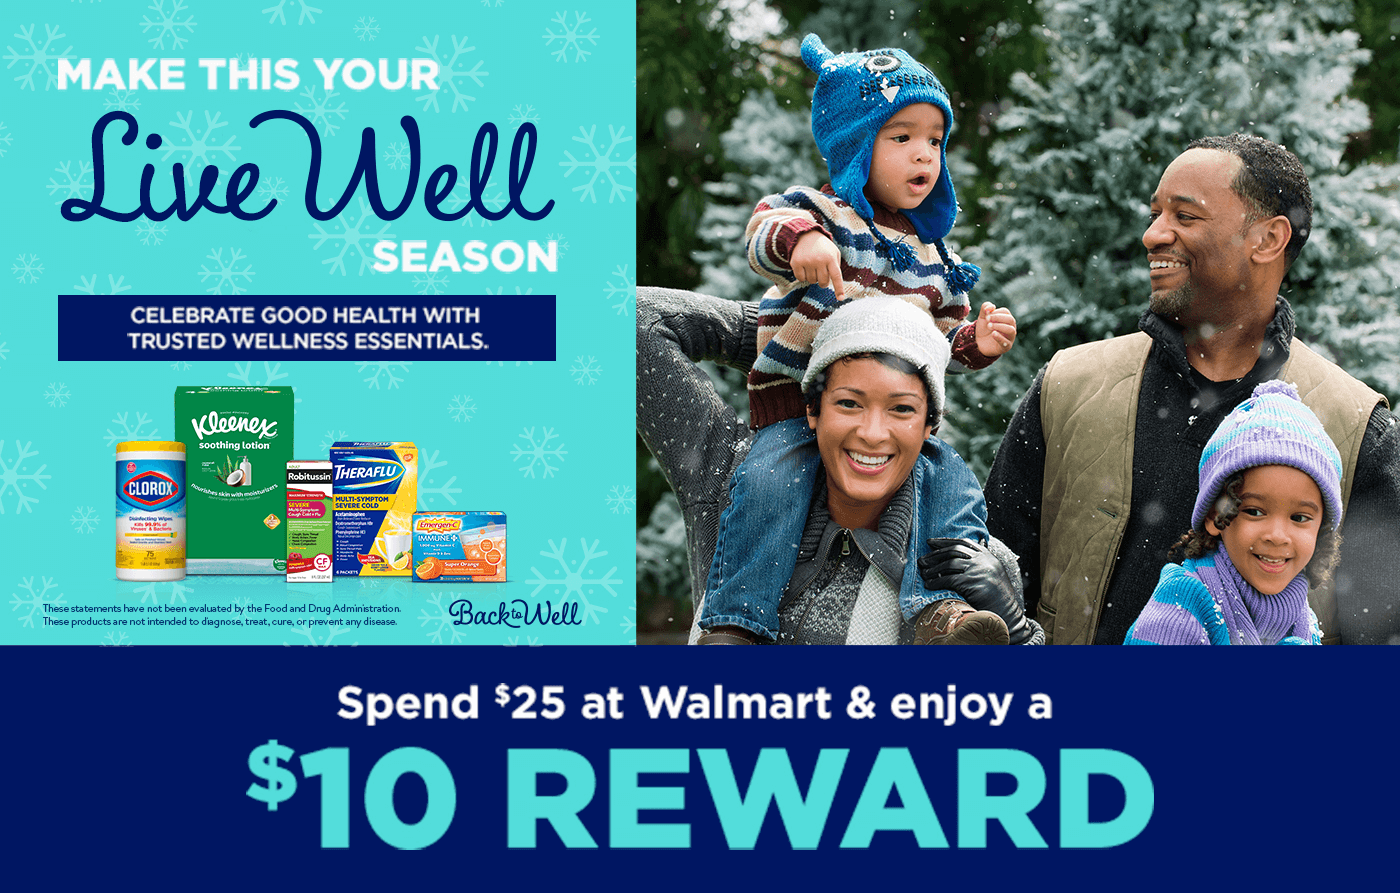 Walmart: Purchase $25+ of Participating Products (Select Clorox, Kleenex, GSK), Get $10 eGift Card (various choices) or $10 VUDU credit